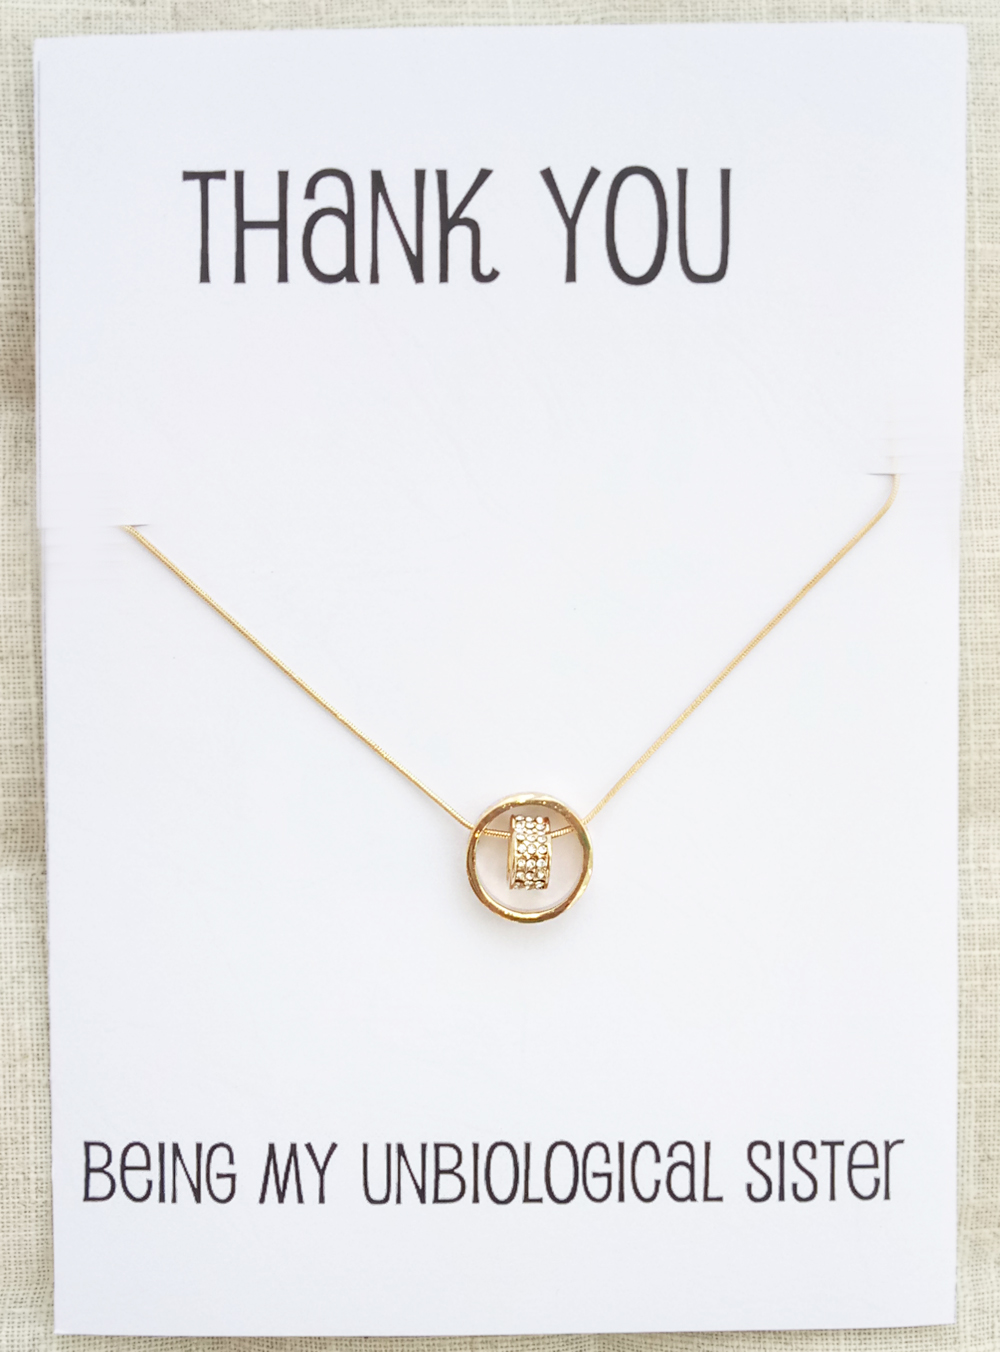 Thank You For Beeing My Unbiological Sister Gift Card Heart And Ring Pendants Rhinestones Gold Toned Woman Fashion Necklace